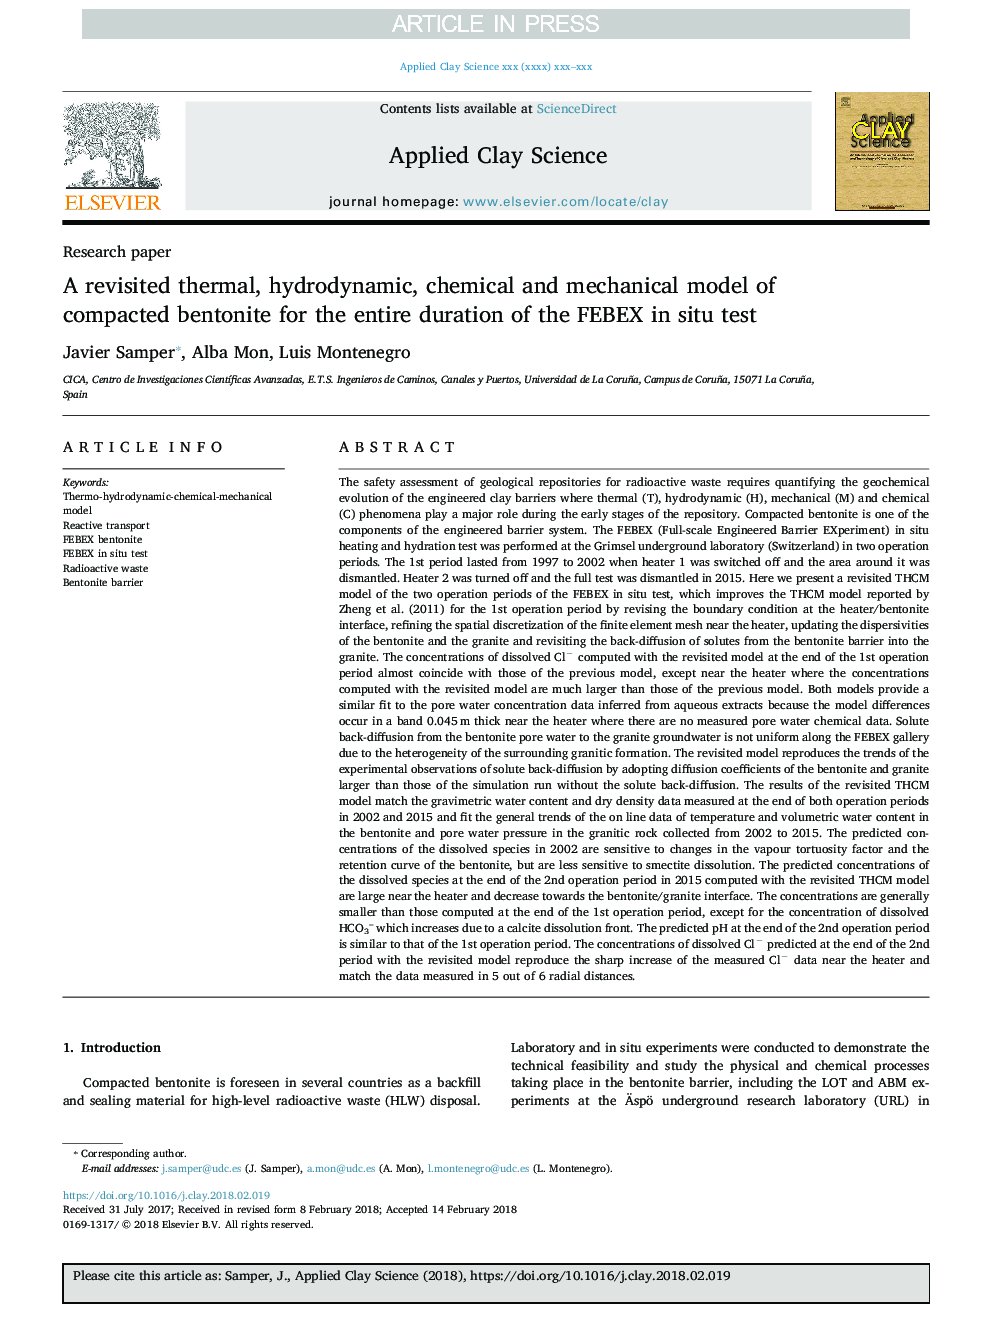 A revisited thermal, hydrodynamic, chemical and mechanical model of compacted bentonite for the entire duration of the FEBEX in situ test